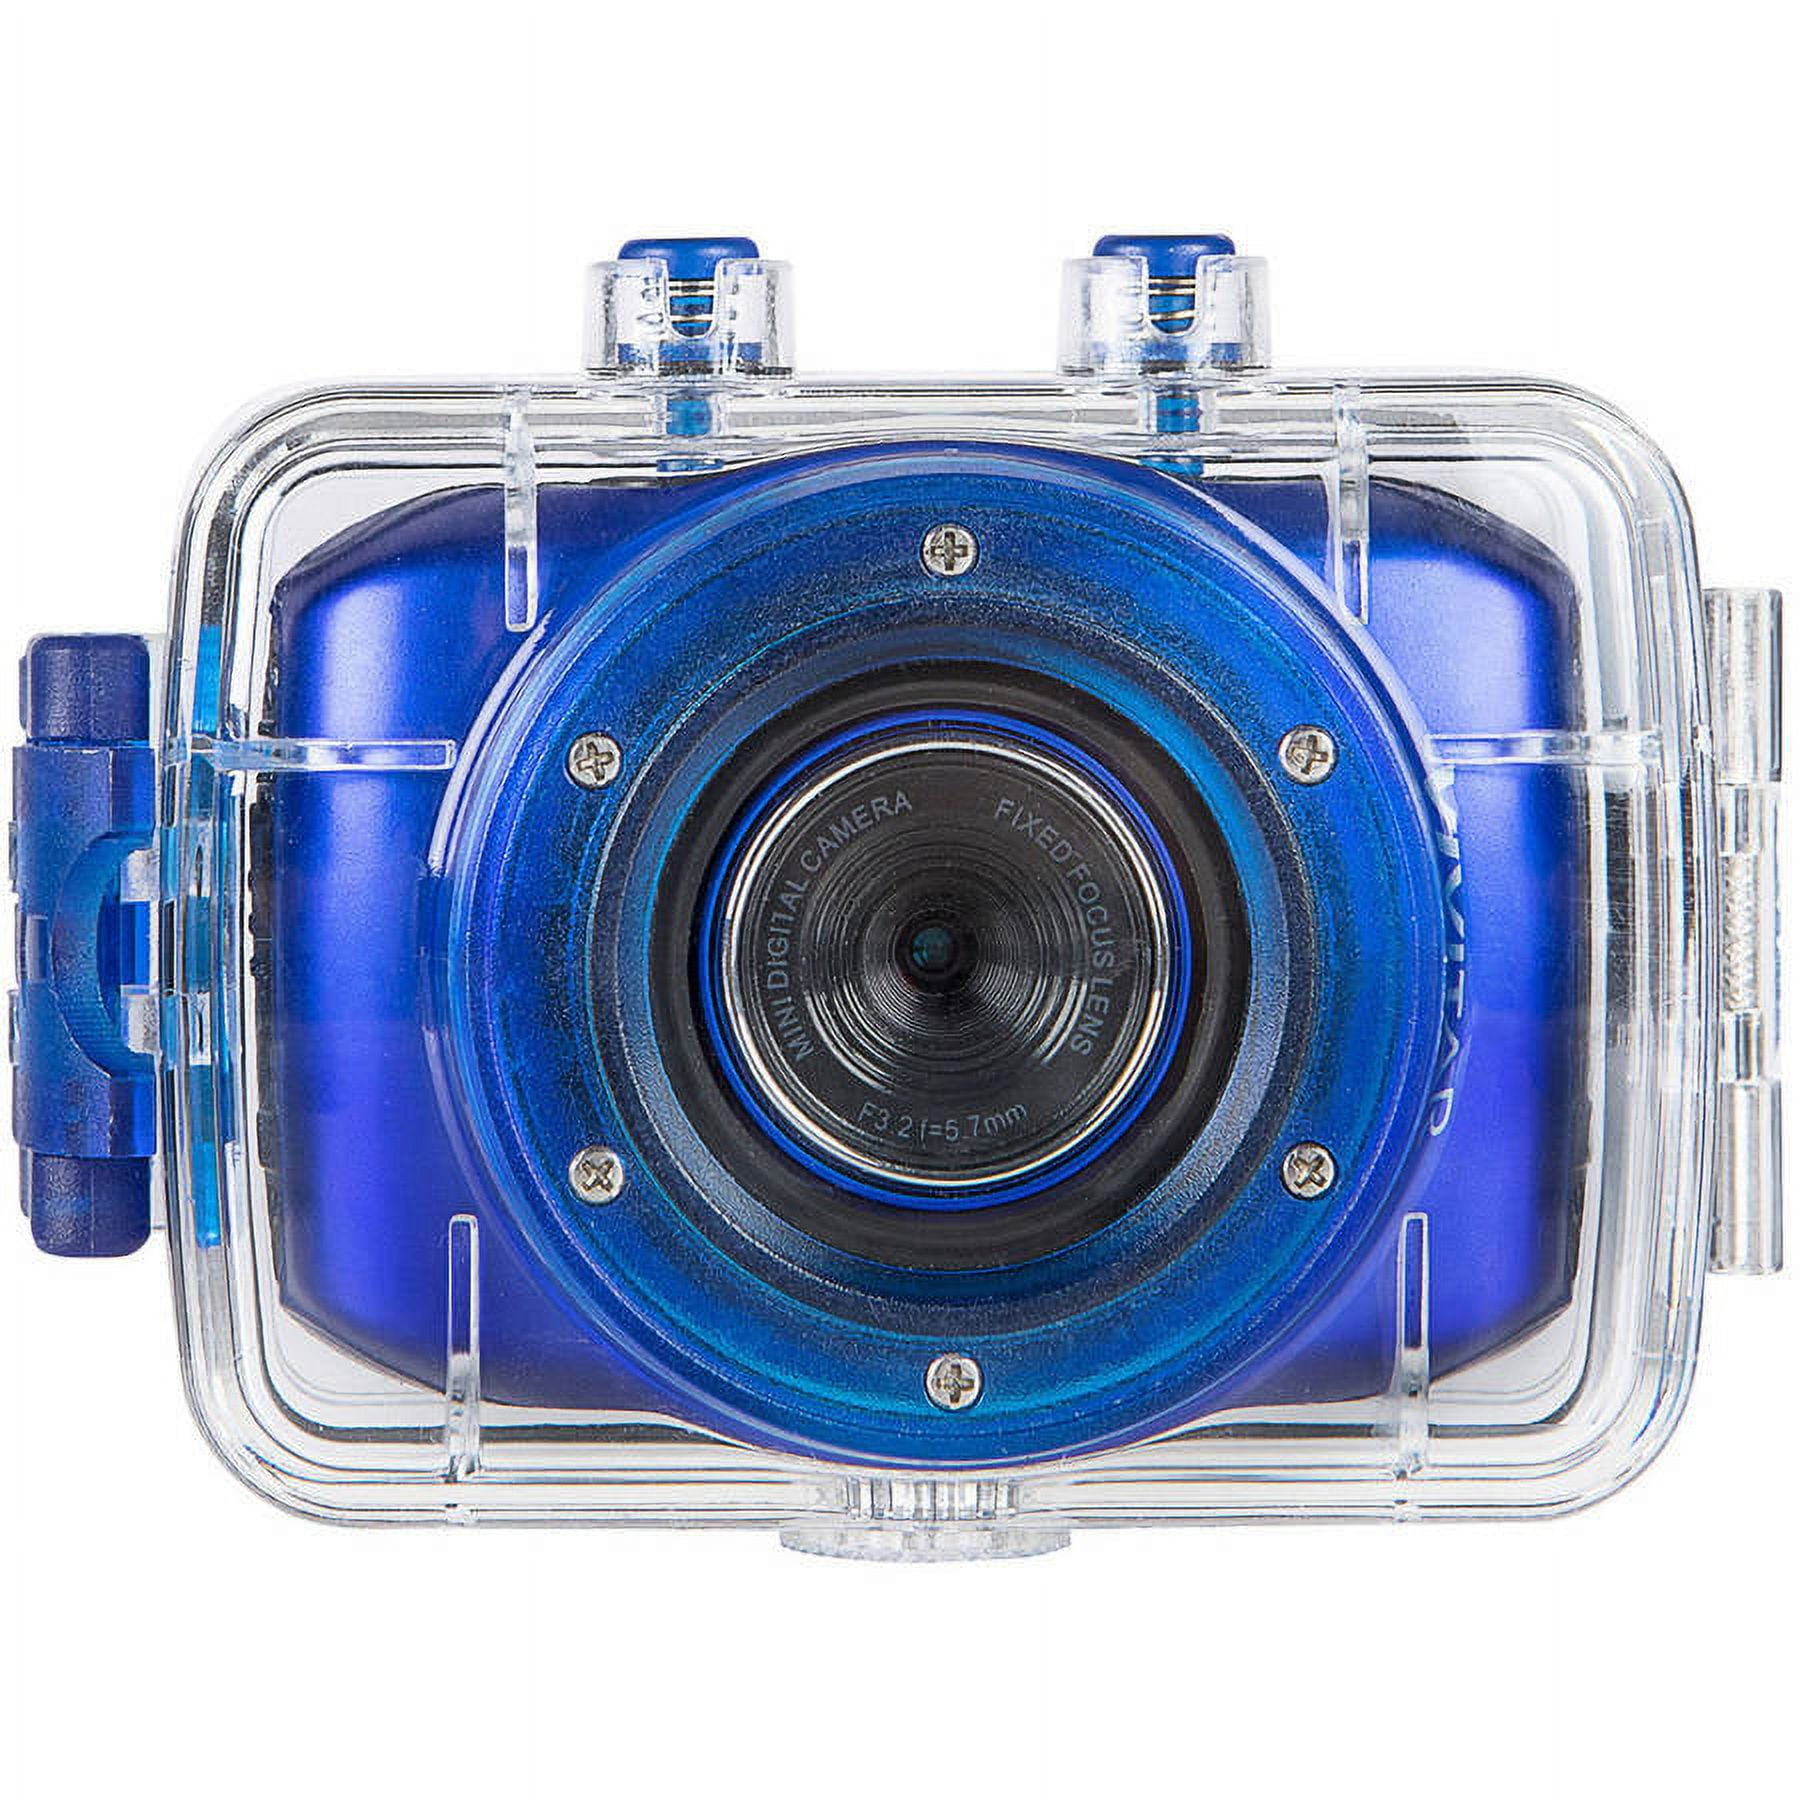 Polaroid Sport Action Camera 720p 12.1mp, Waterproof, Rechargeable